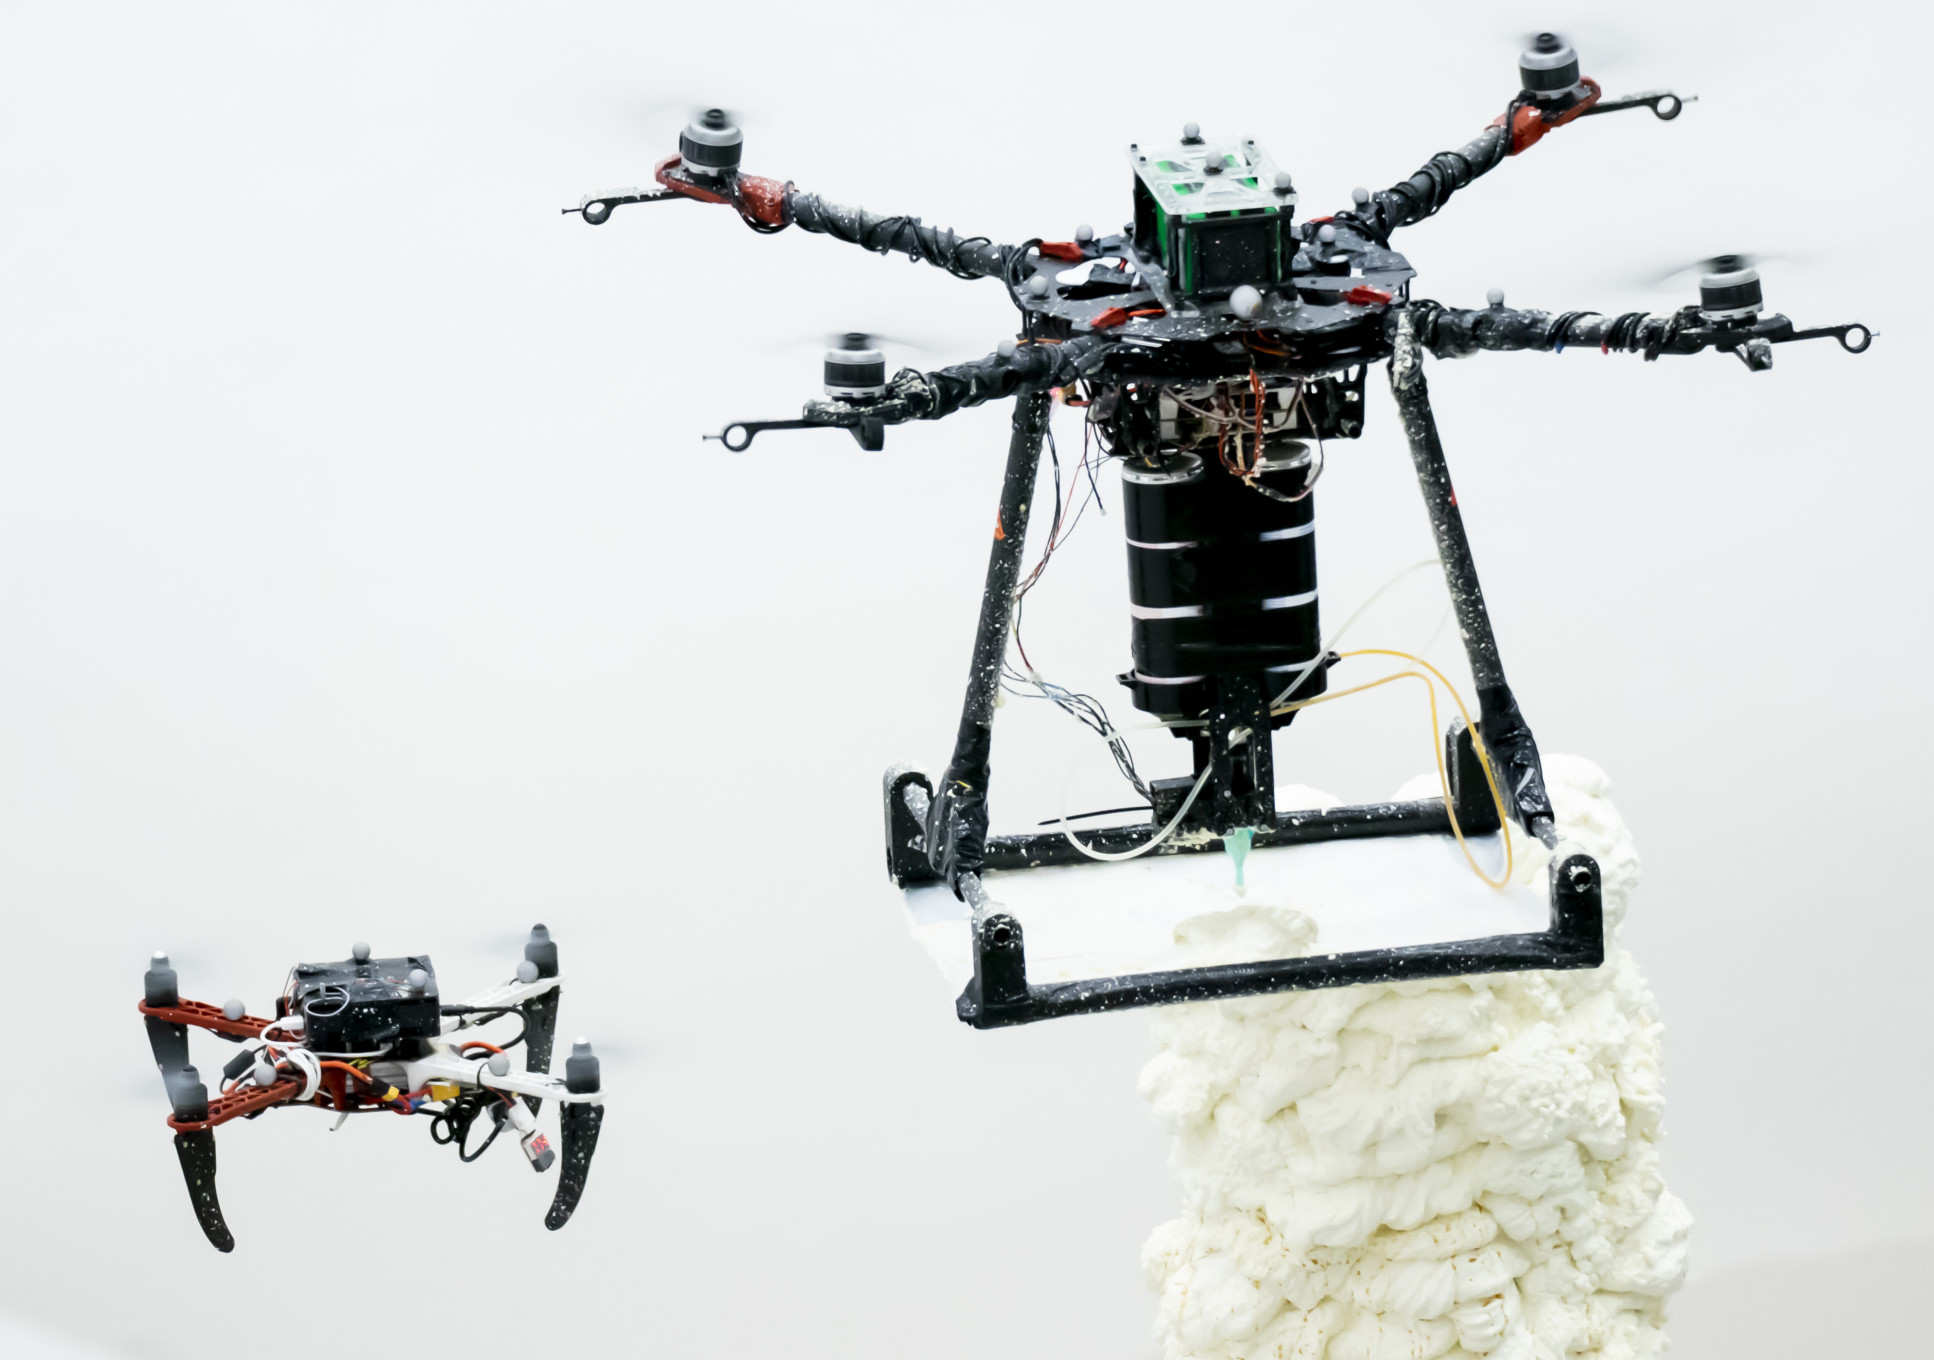 Smaller drone next to a larger drone which is printing a white material